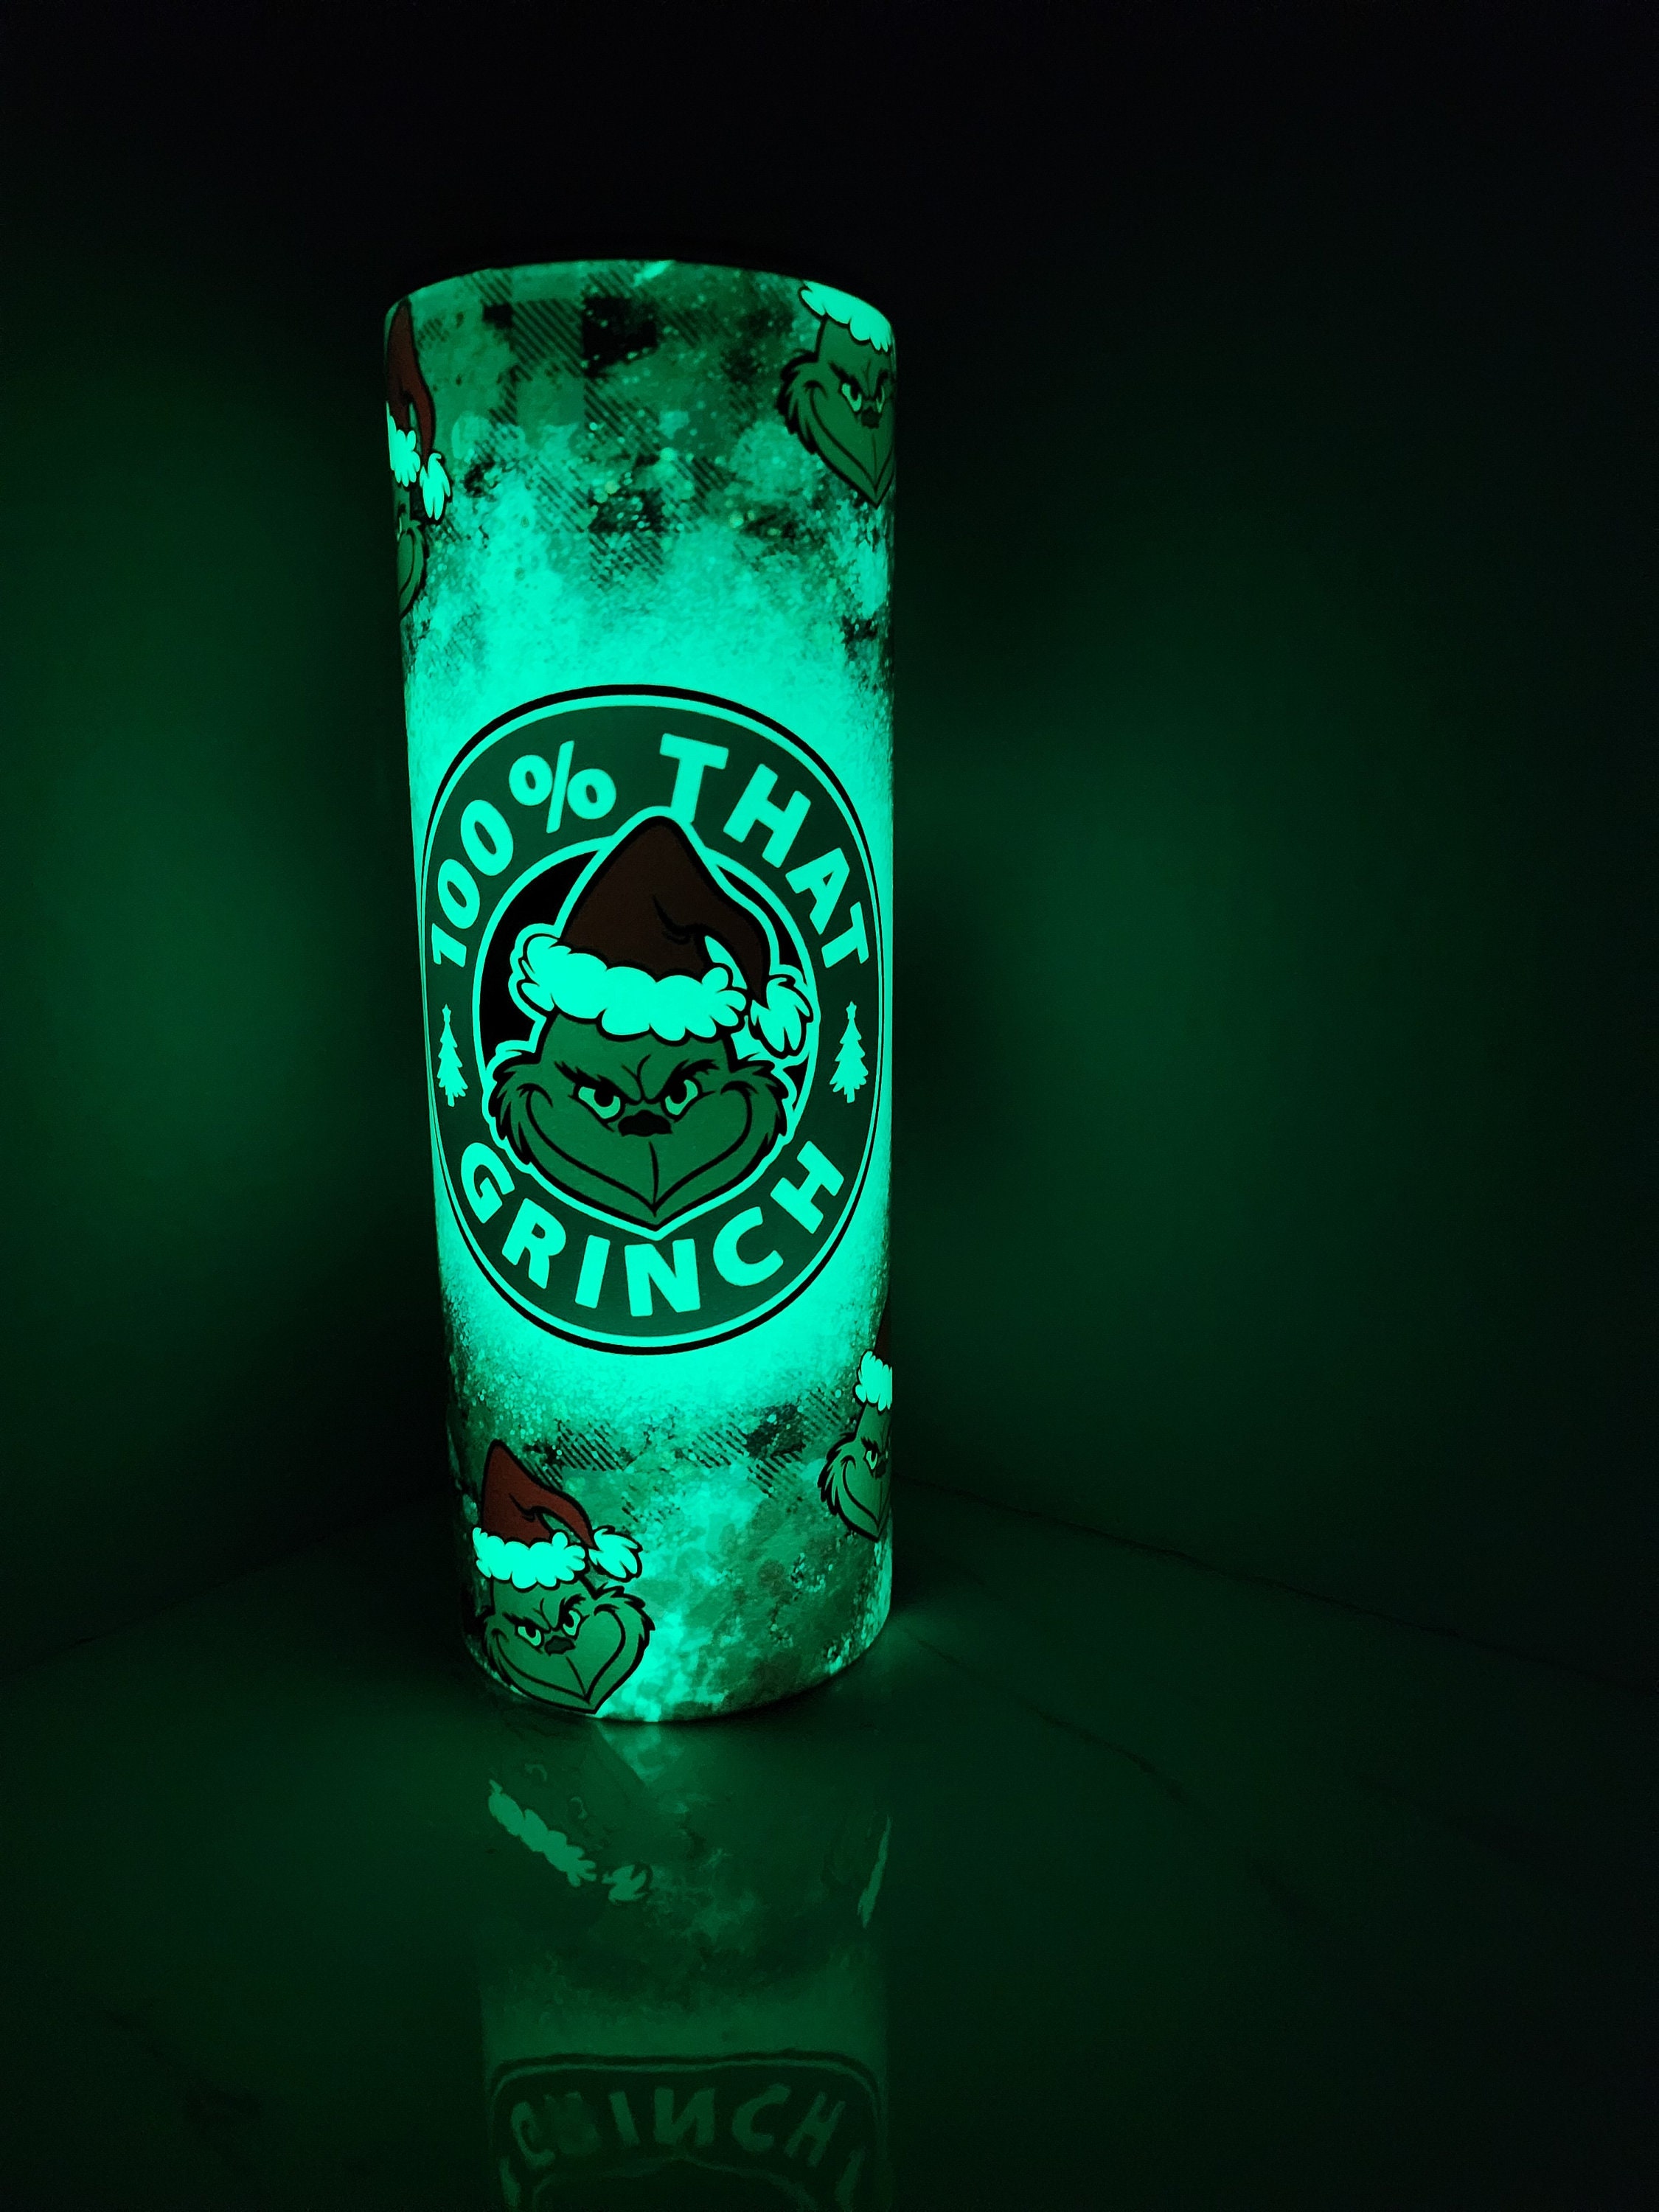 Glow in the Dark Cups, Nite Glow Cups, Glow Cups, Glow Party Cups, Plastic  Cups, Personalized Plastic Cups, Custom Plastic Cups 